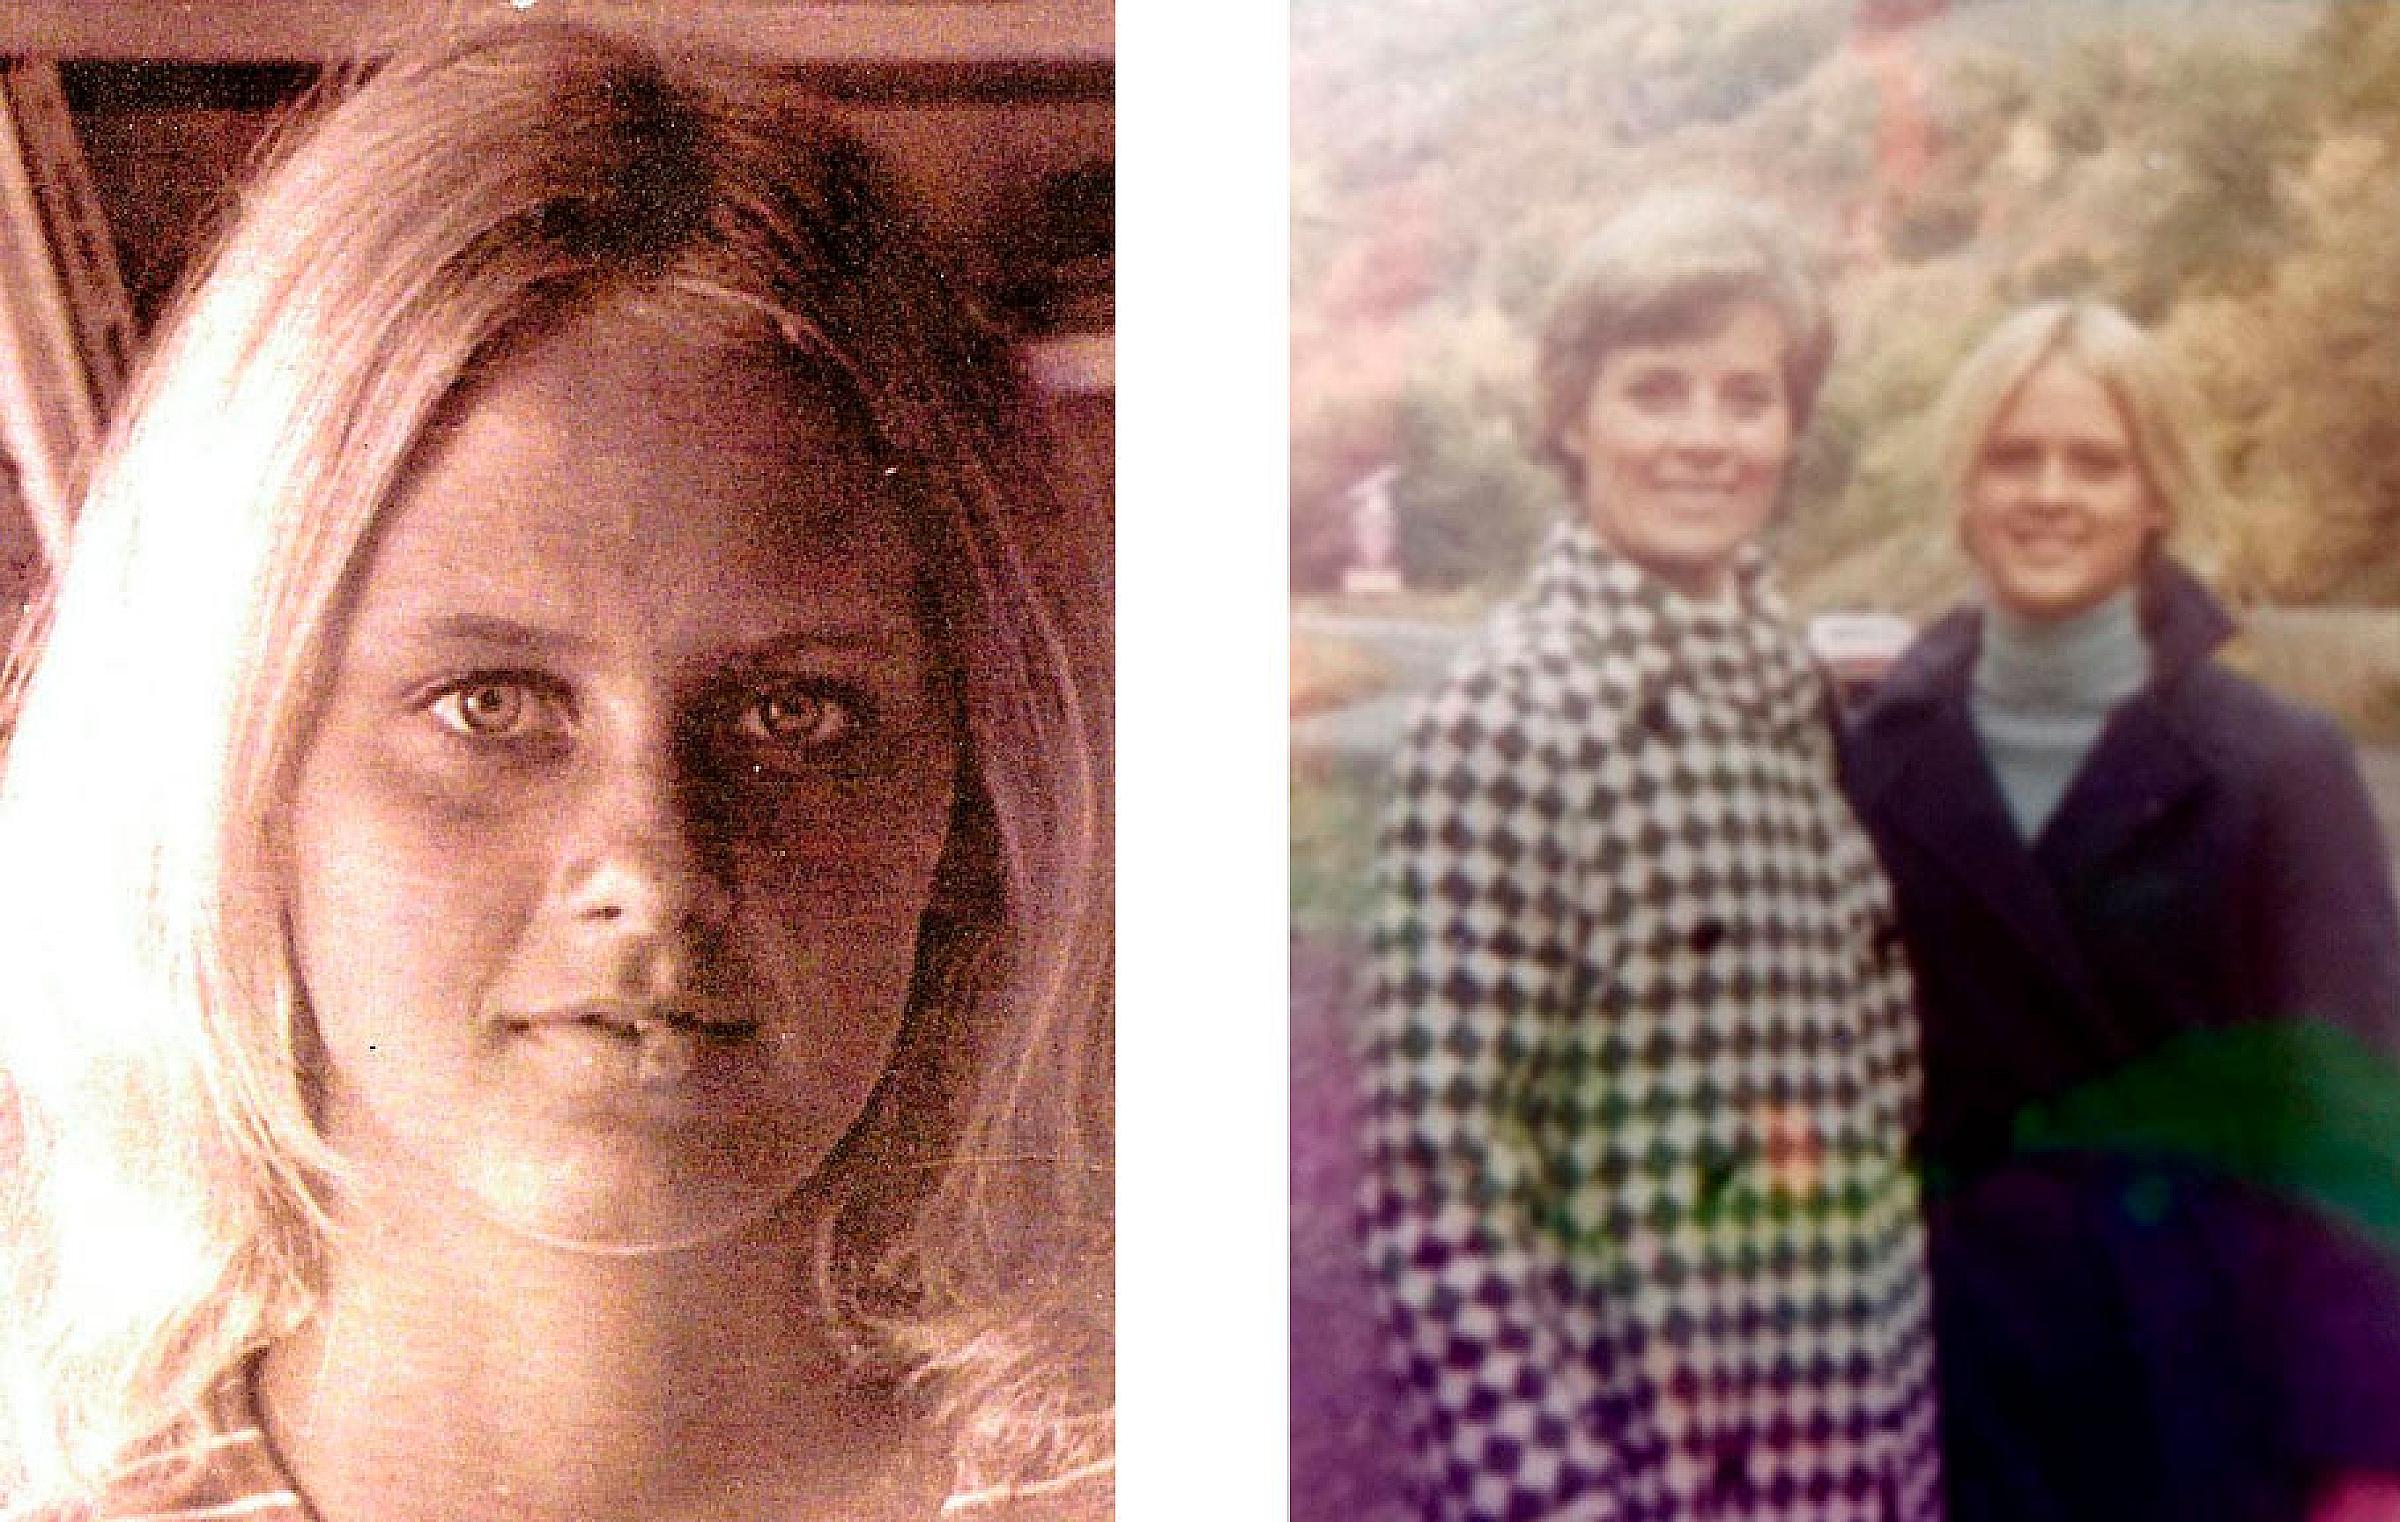 Left: Terri Perine, LaDorna’s youngest daughter who passed away from bone cancer in 1973. Right: LaDorna and Terri at Brigham Young University